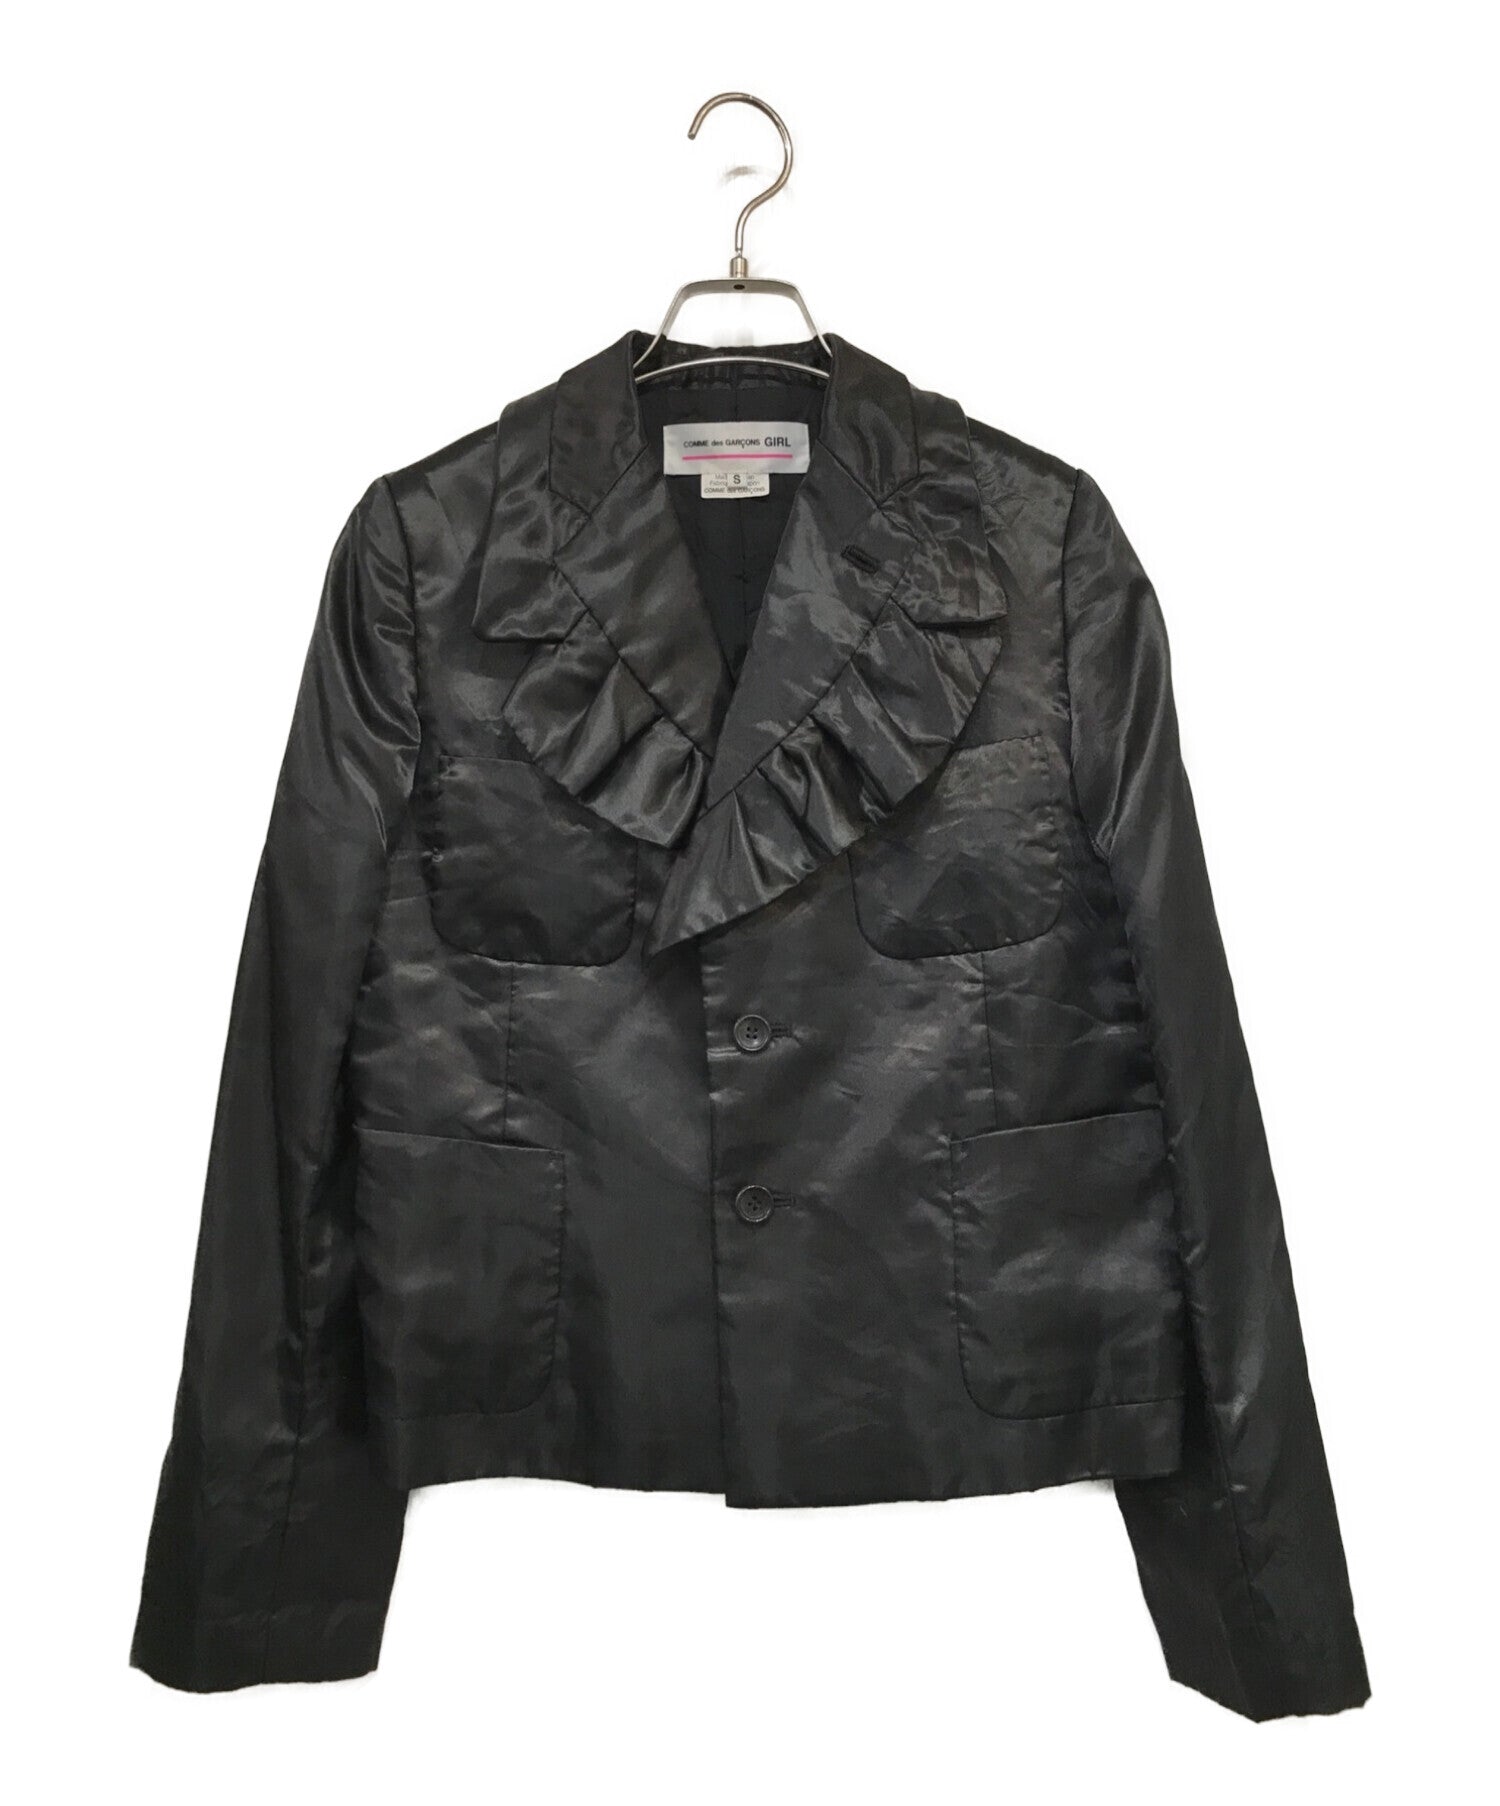 COMME des GARCONS GIRL Frill Collar Tailored Jacket NS-J001